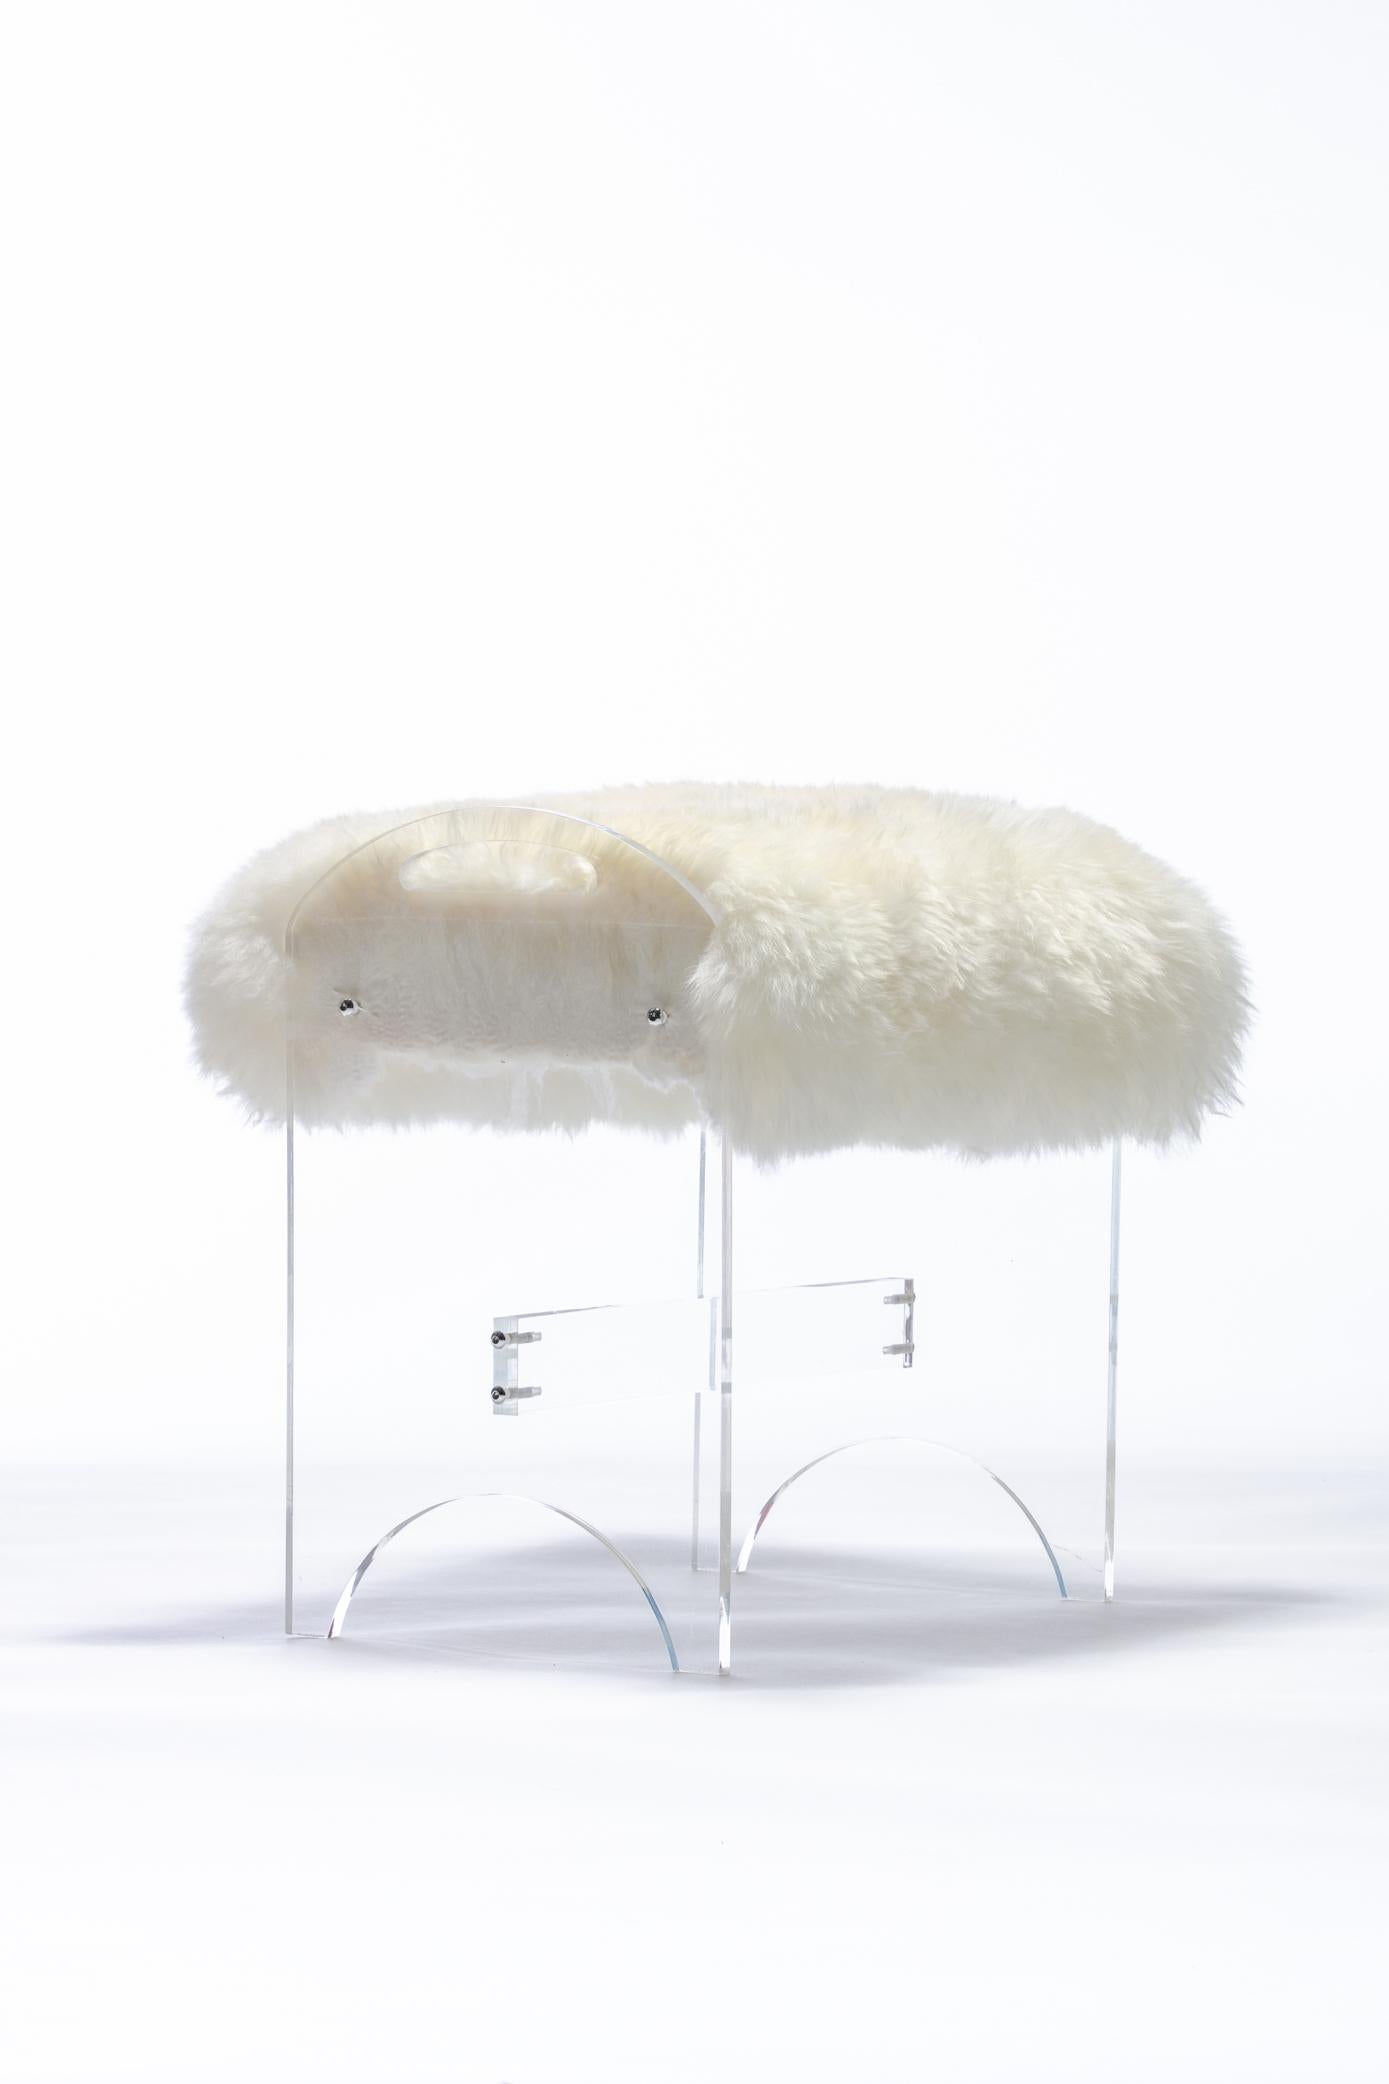 Vanity stool or bench in Lucite with sheepskin upholstery. New upholstery. Clearly chic. This bench / stool could be used with a vanity or as additional seating nested in front of a cocktail table or in a walk in closet to sit to put your shoes on.